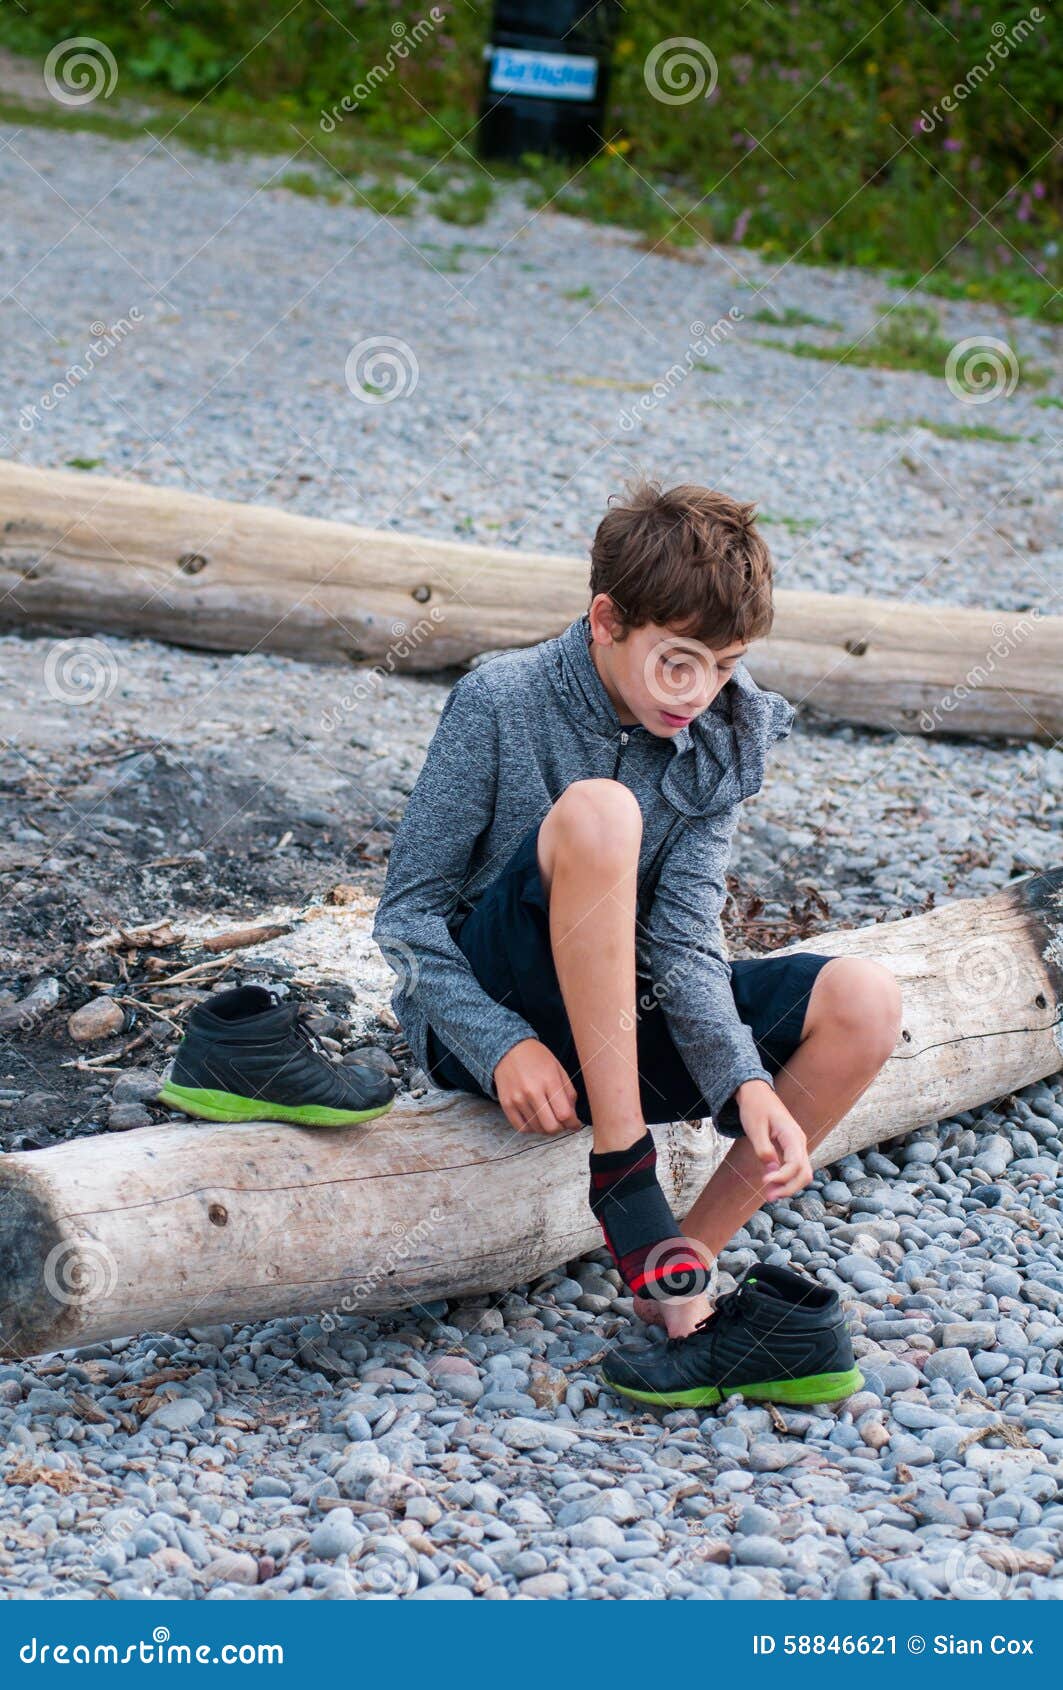 Young Boy Sitting On A Bench Putting On His Shoes At The 